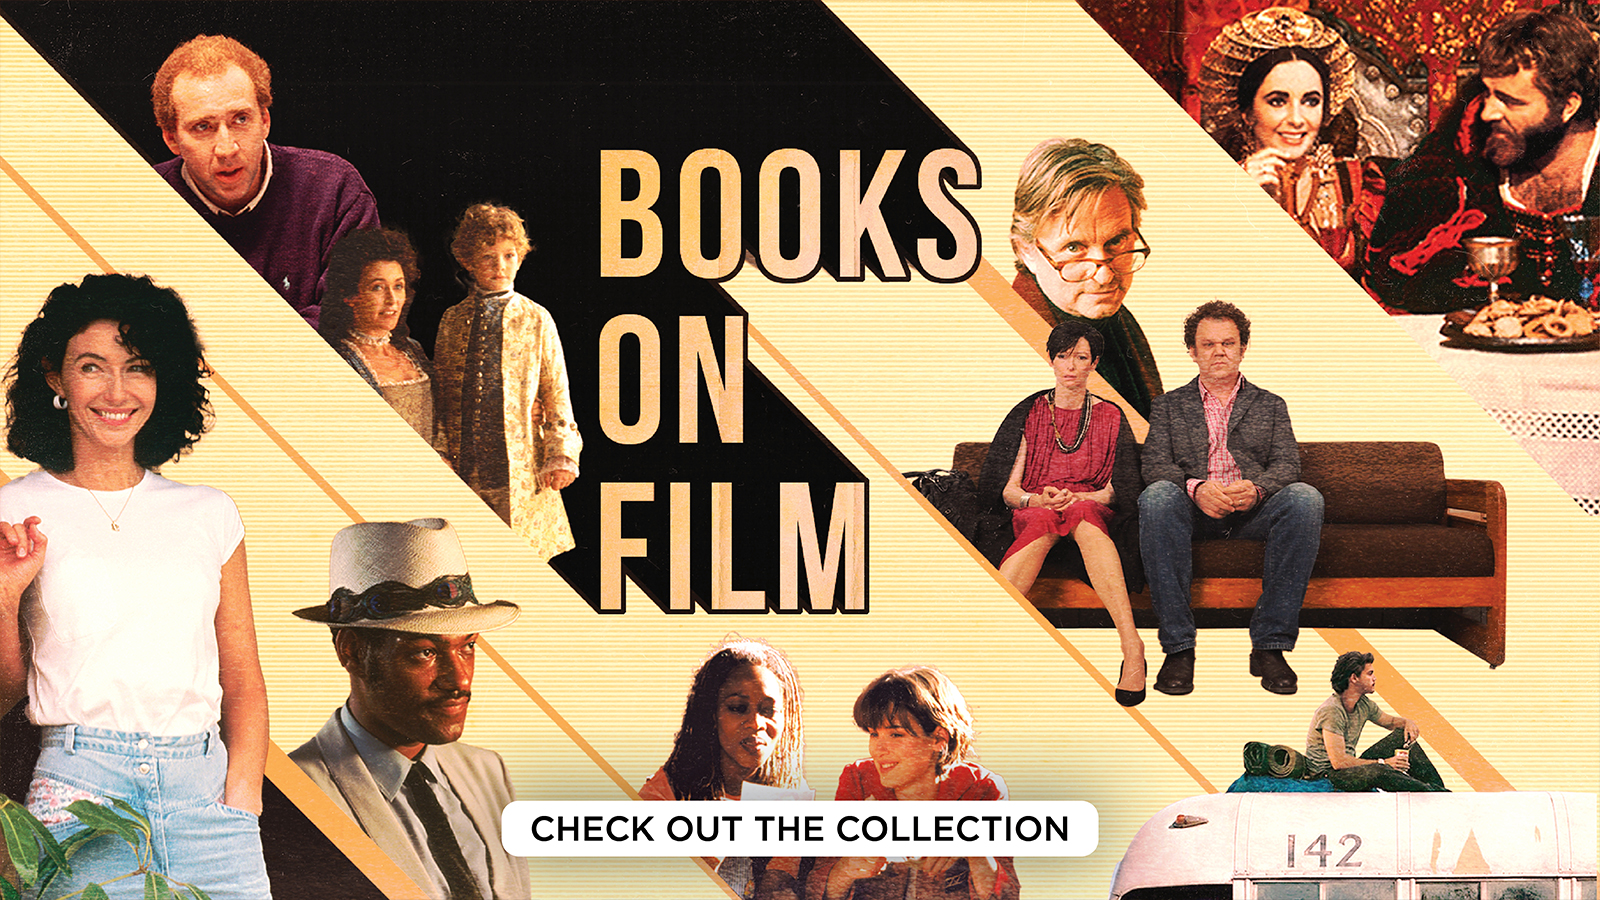 Books on Film - Check out the Collection